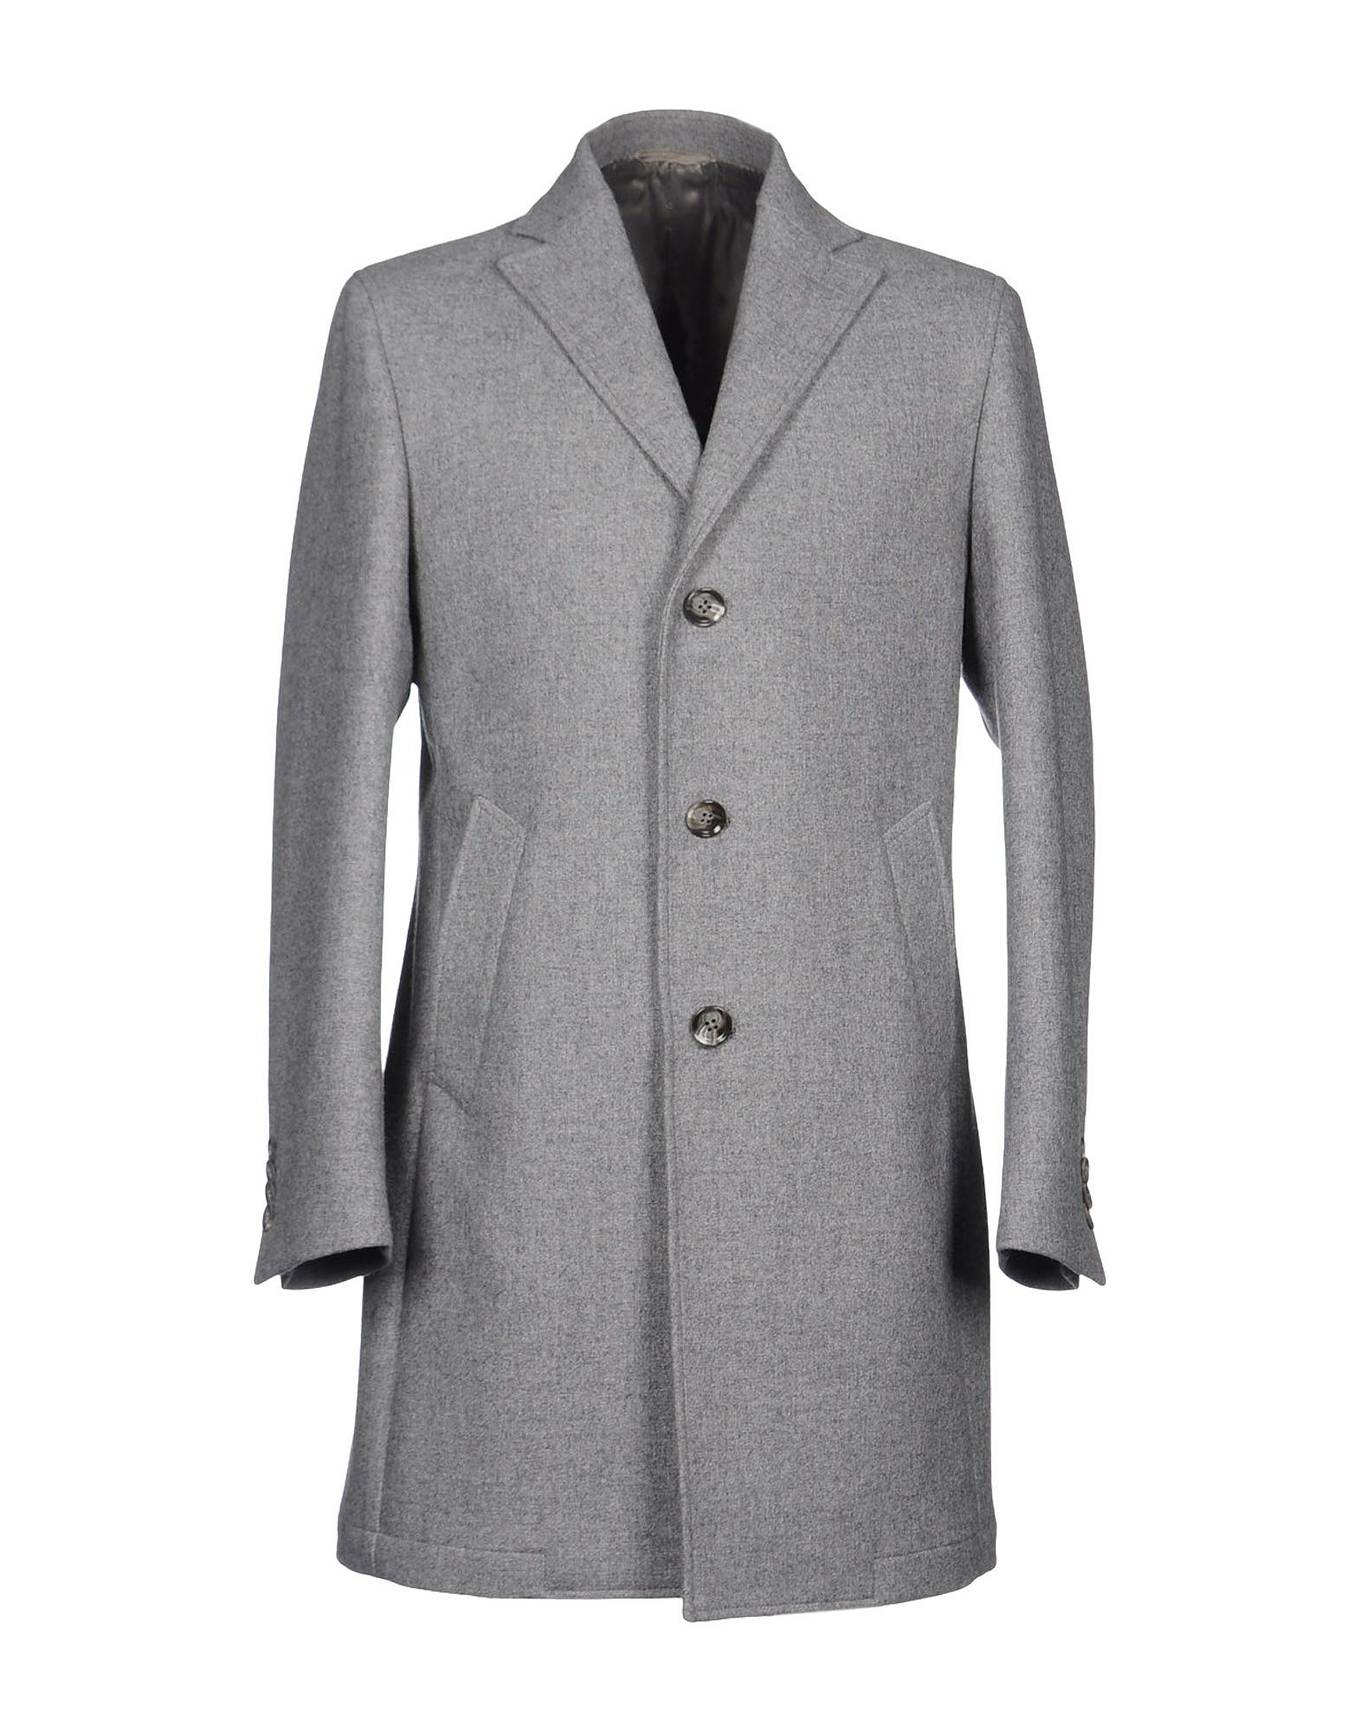 Quality Overcoats - Top Men's Outerwear Picks